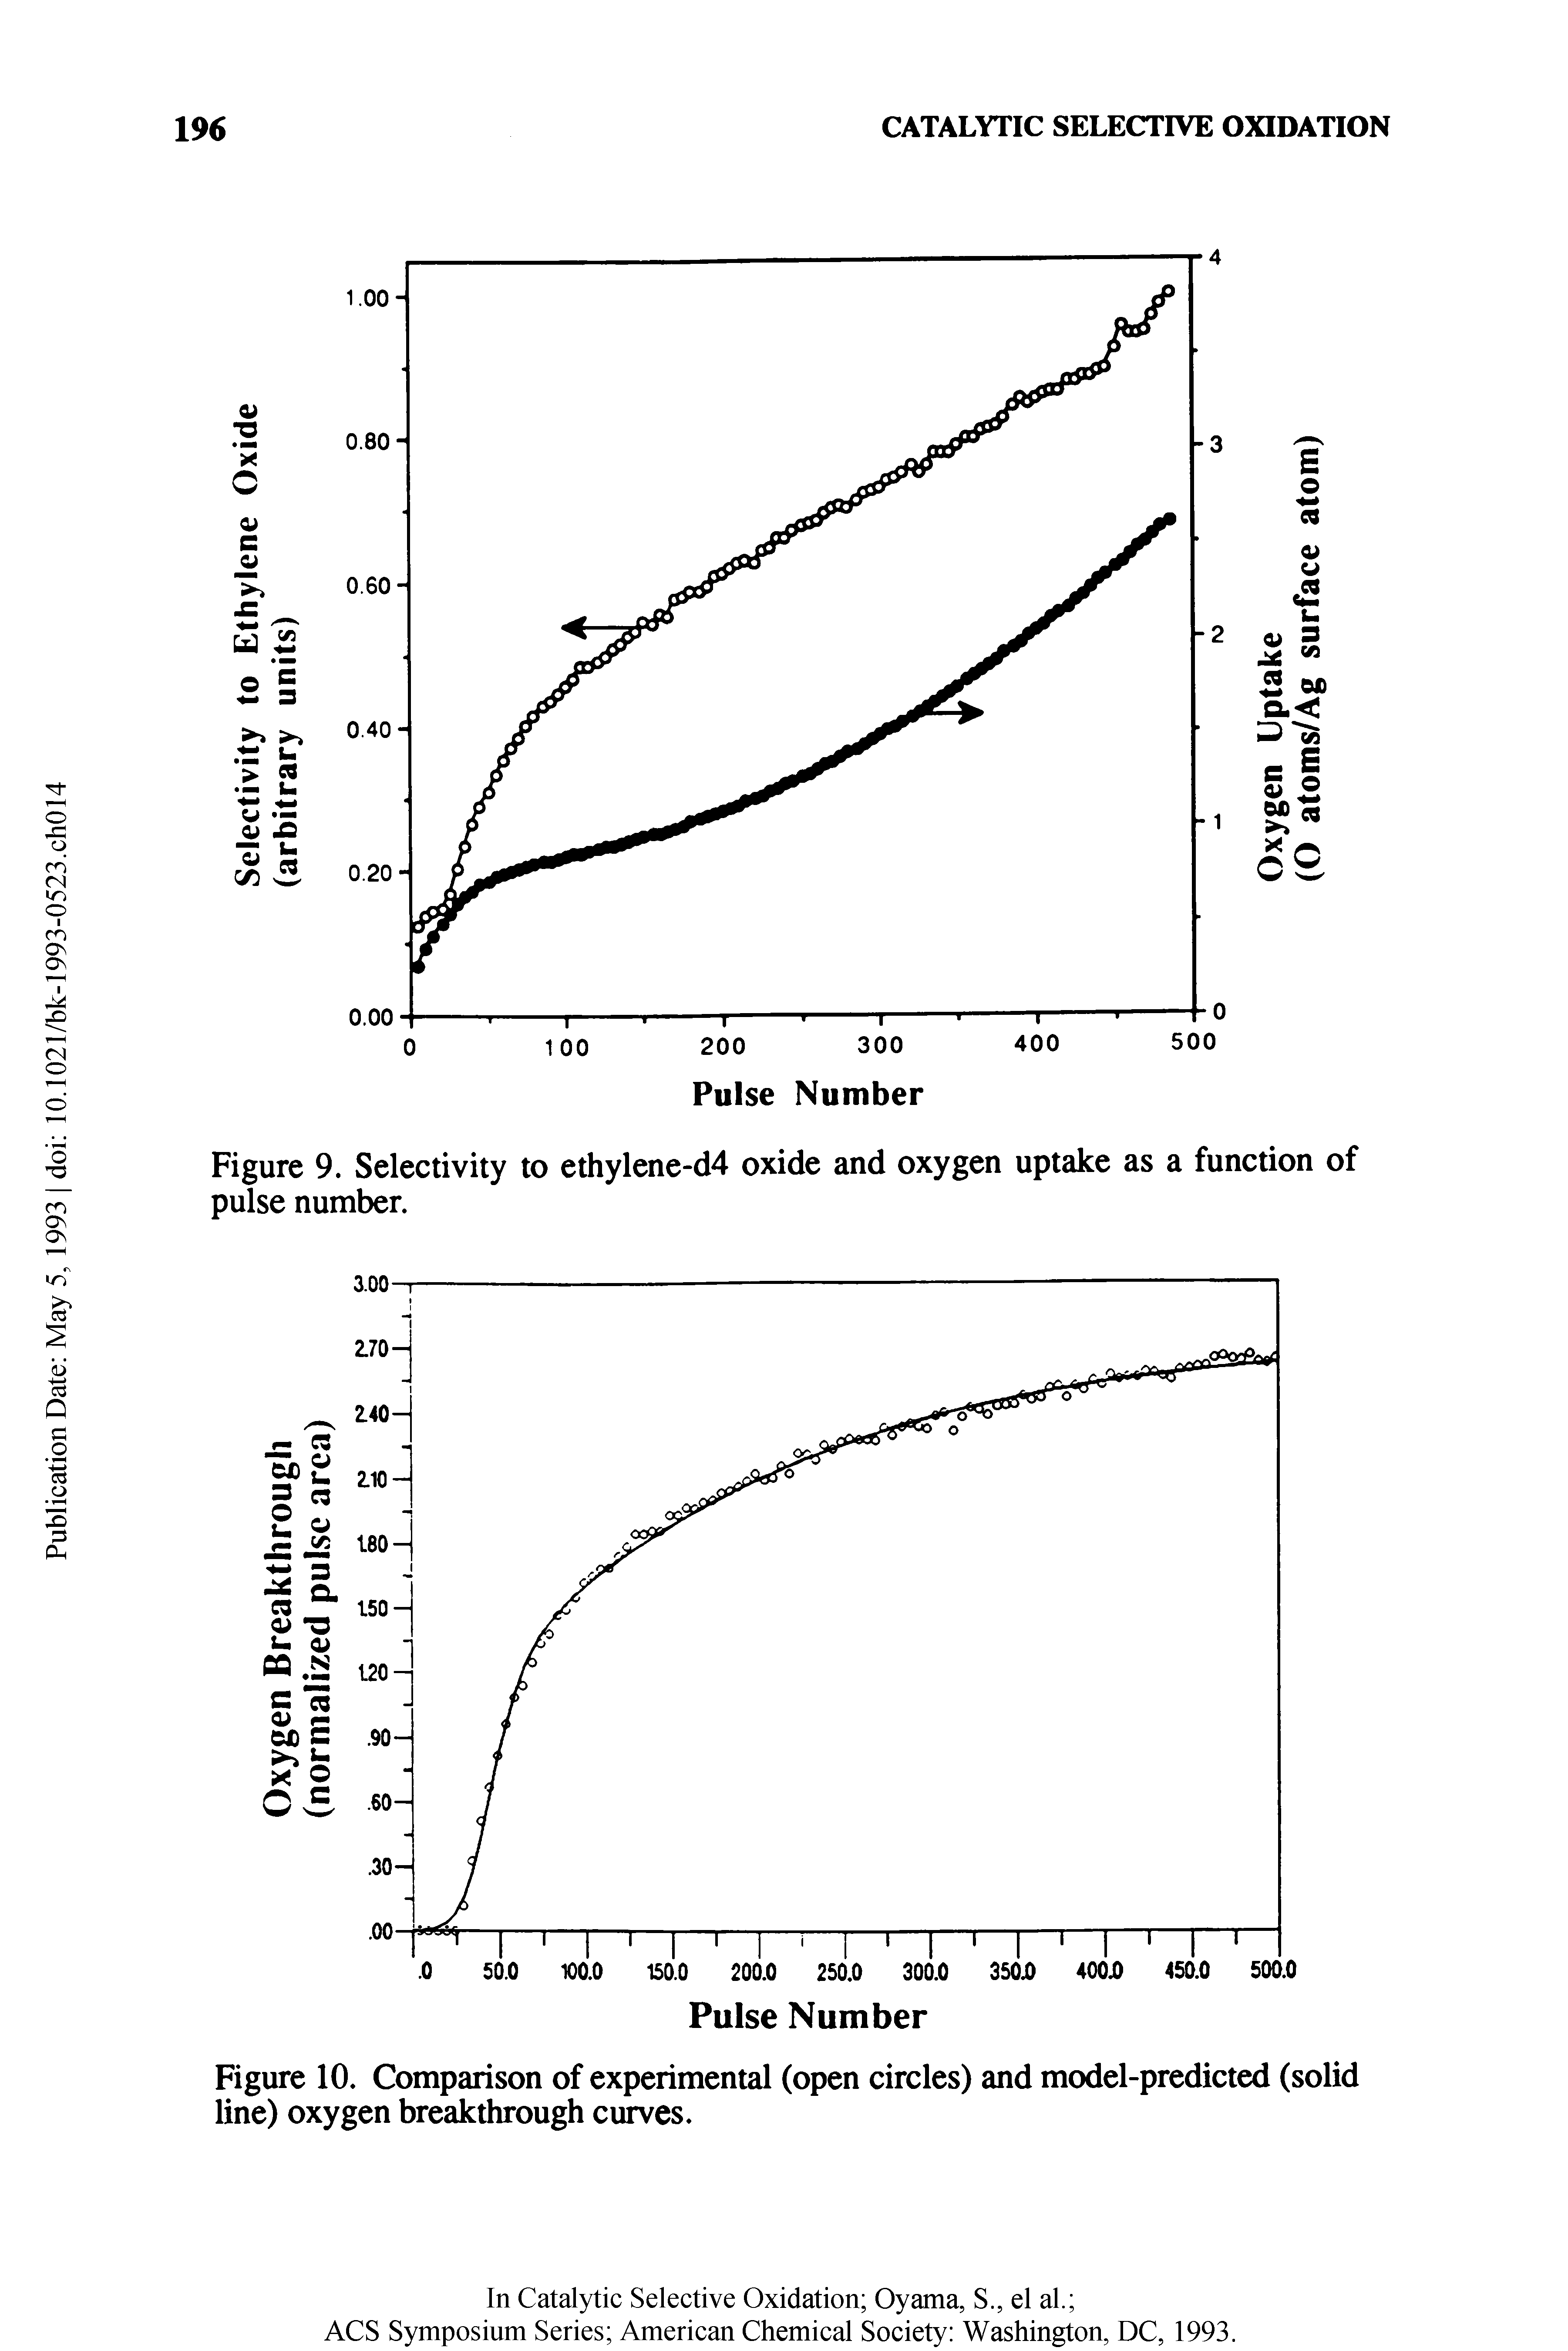 Figure 10. Comparison of experimental (open circles) and model-predicted (solid line) oxygen breakthrough curves.